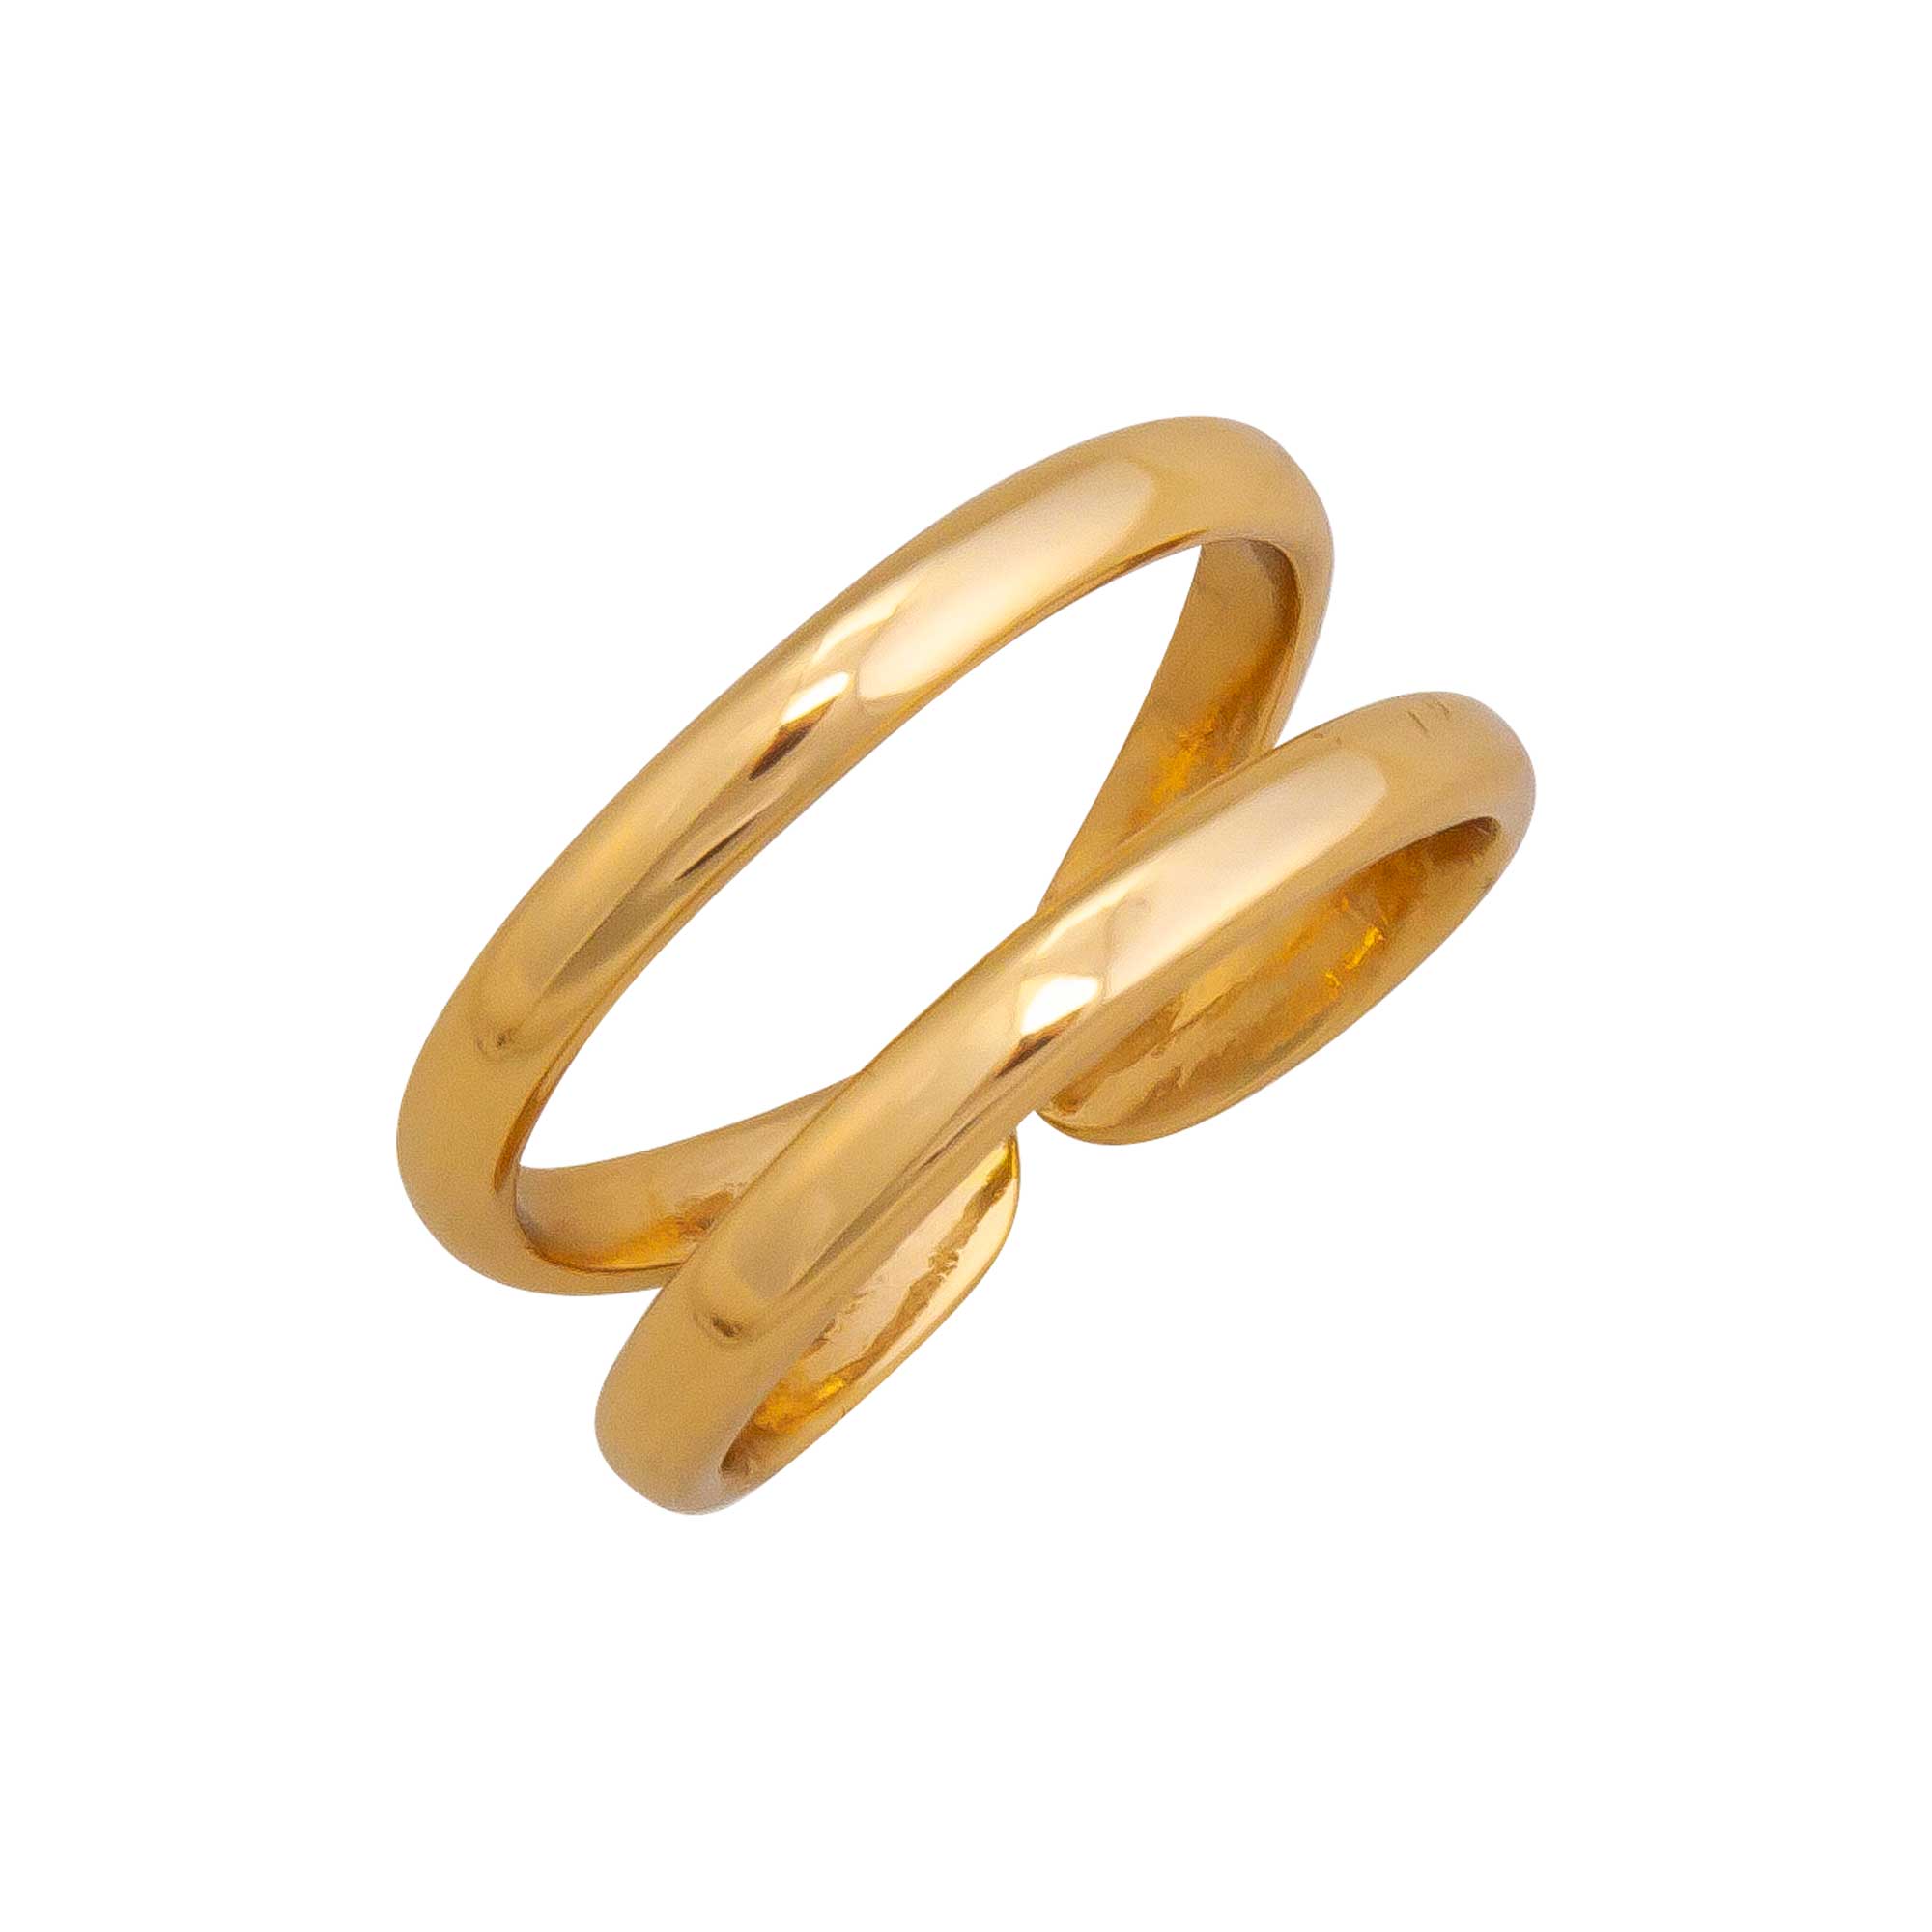 Alchemia Double Band Adjustable Ring | Charles Albert Jewelry